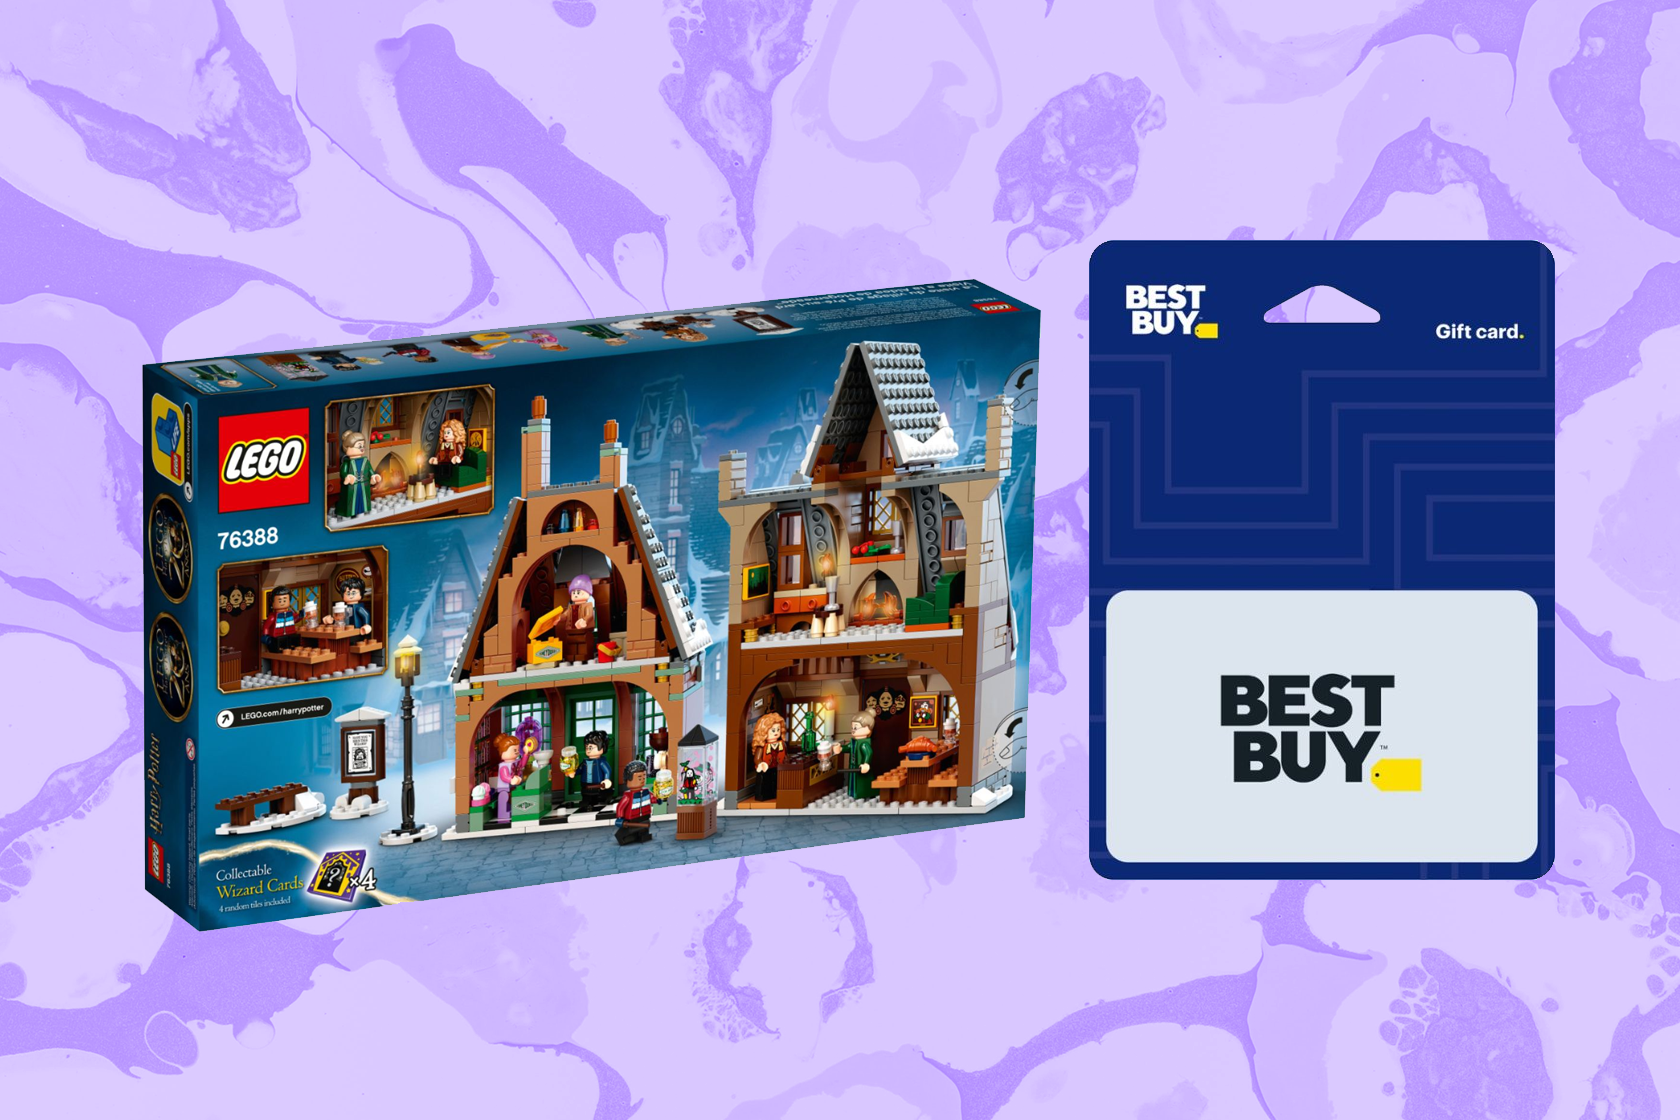 Best Buy is offering $10 and $20 gift certificates for free with select LEGO orders